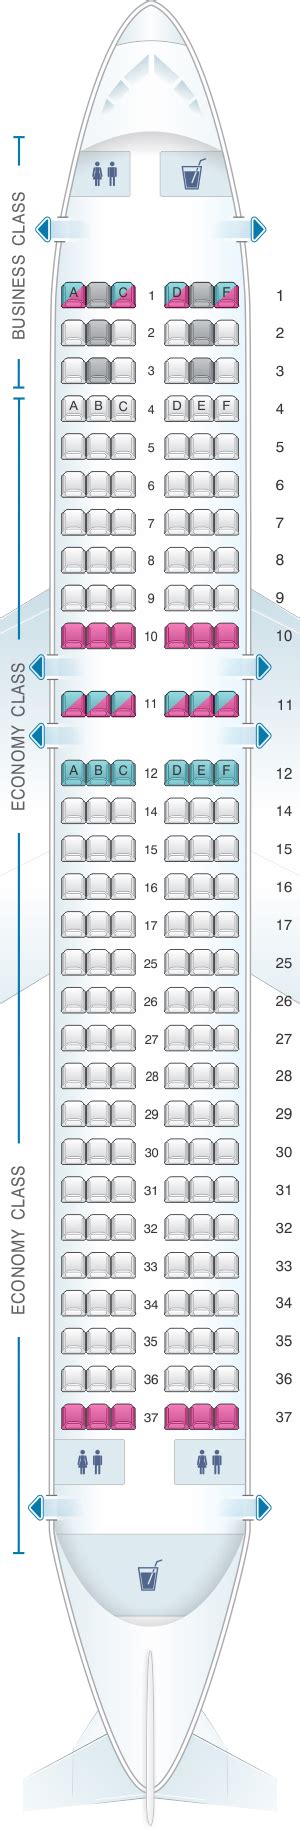 Seat Map Air France Airbus A320 Europe V2 Seatmaestro Images And